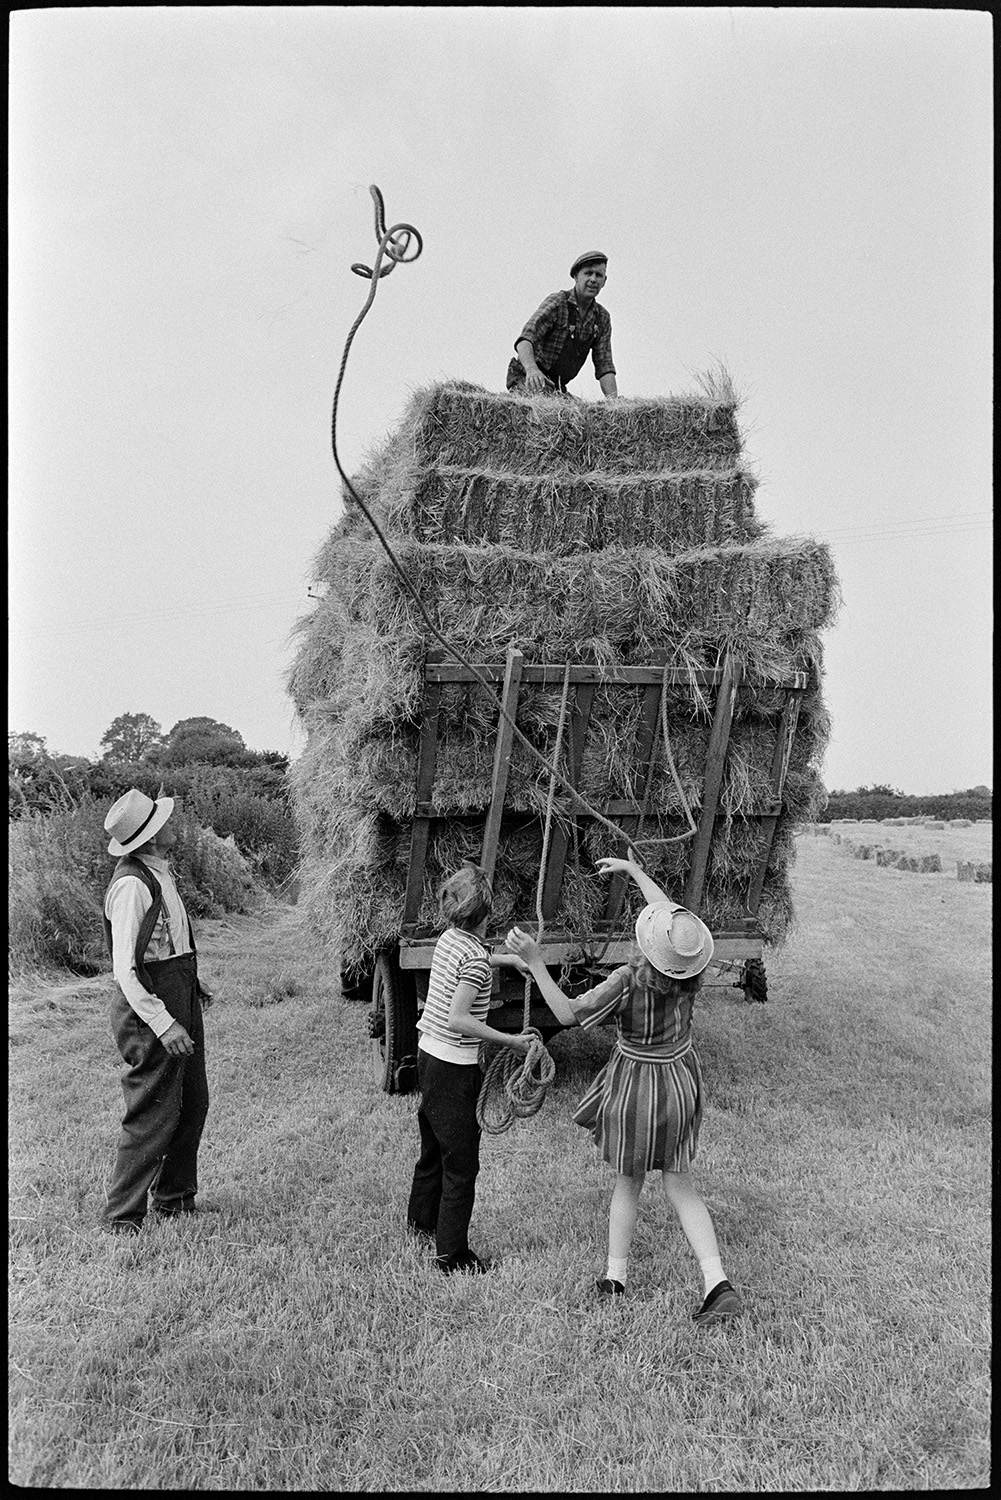 Family haymaking in field. 
[The Oke family securing a load of hay bales on a trailer with a rope in a field at Deckport, Hatherleigh. Miss Oke and Master Oke are throwing ropes up to their father, Mr Oke who is on the trailer.]